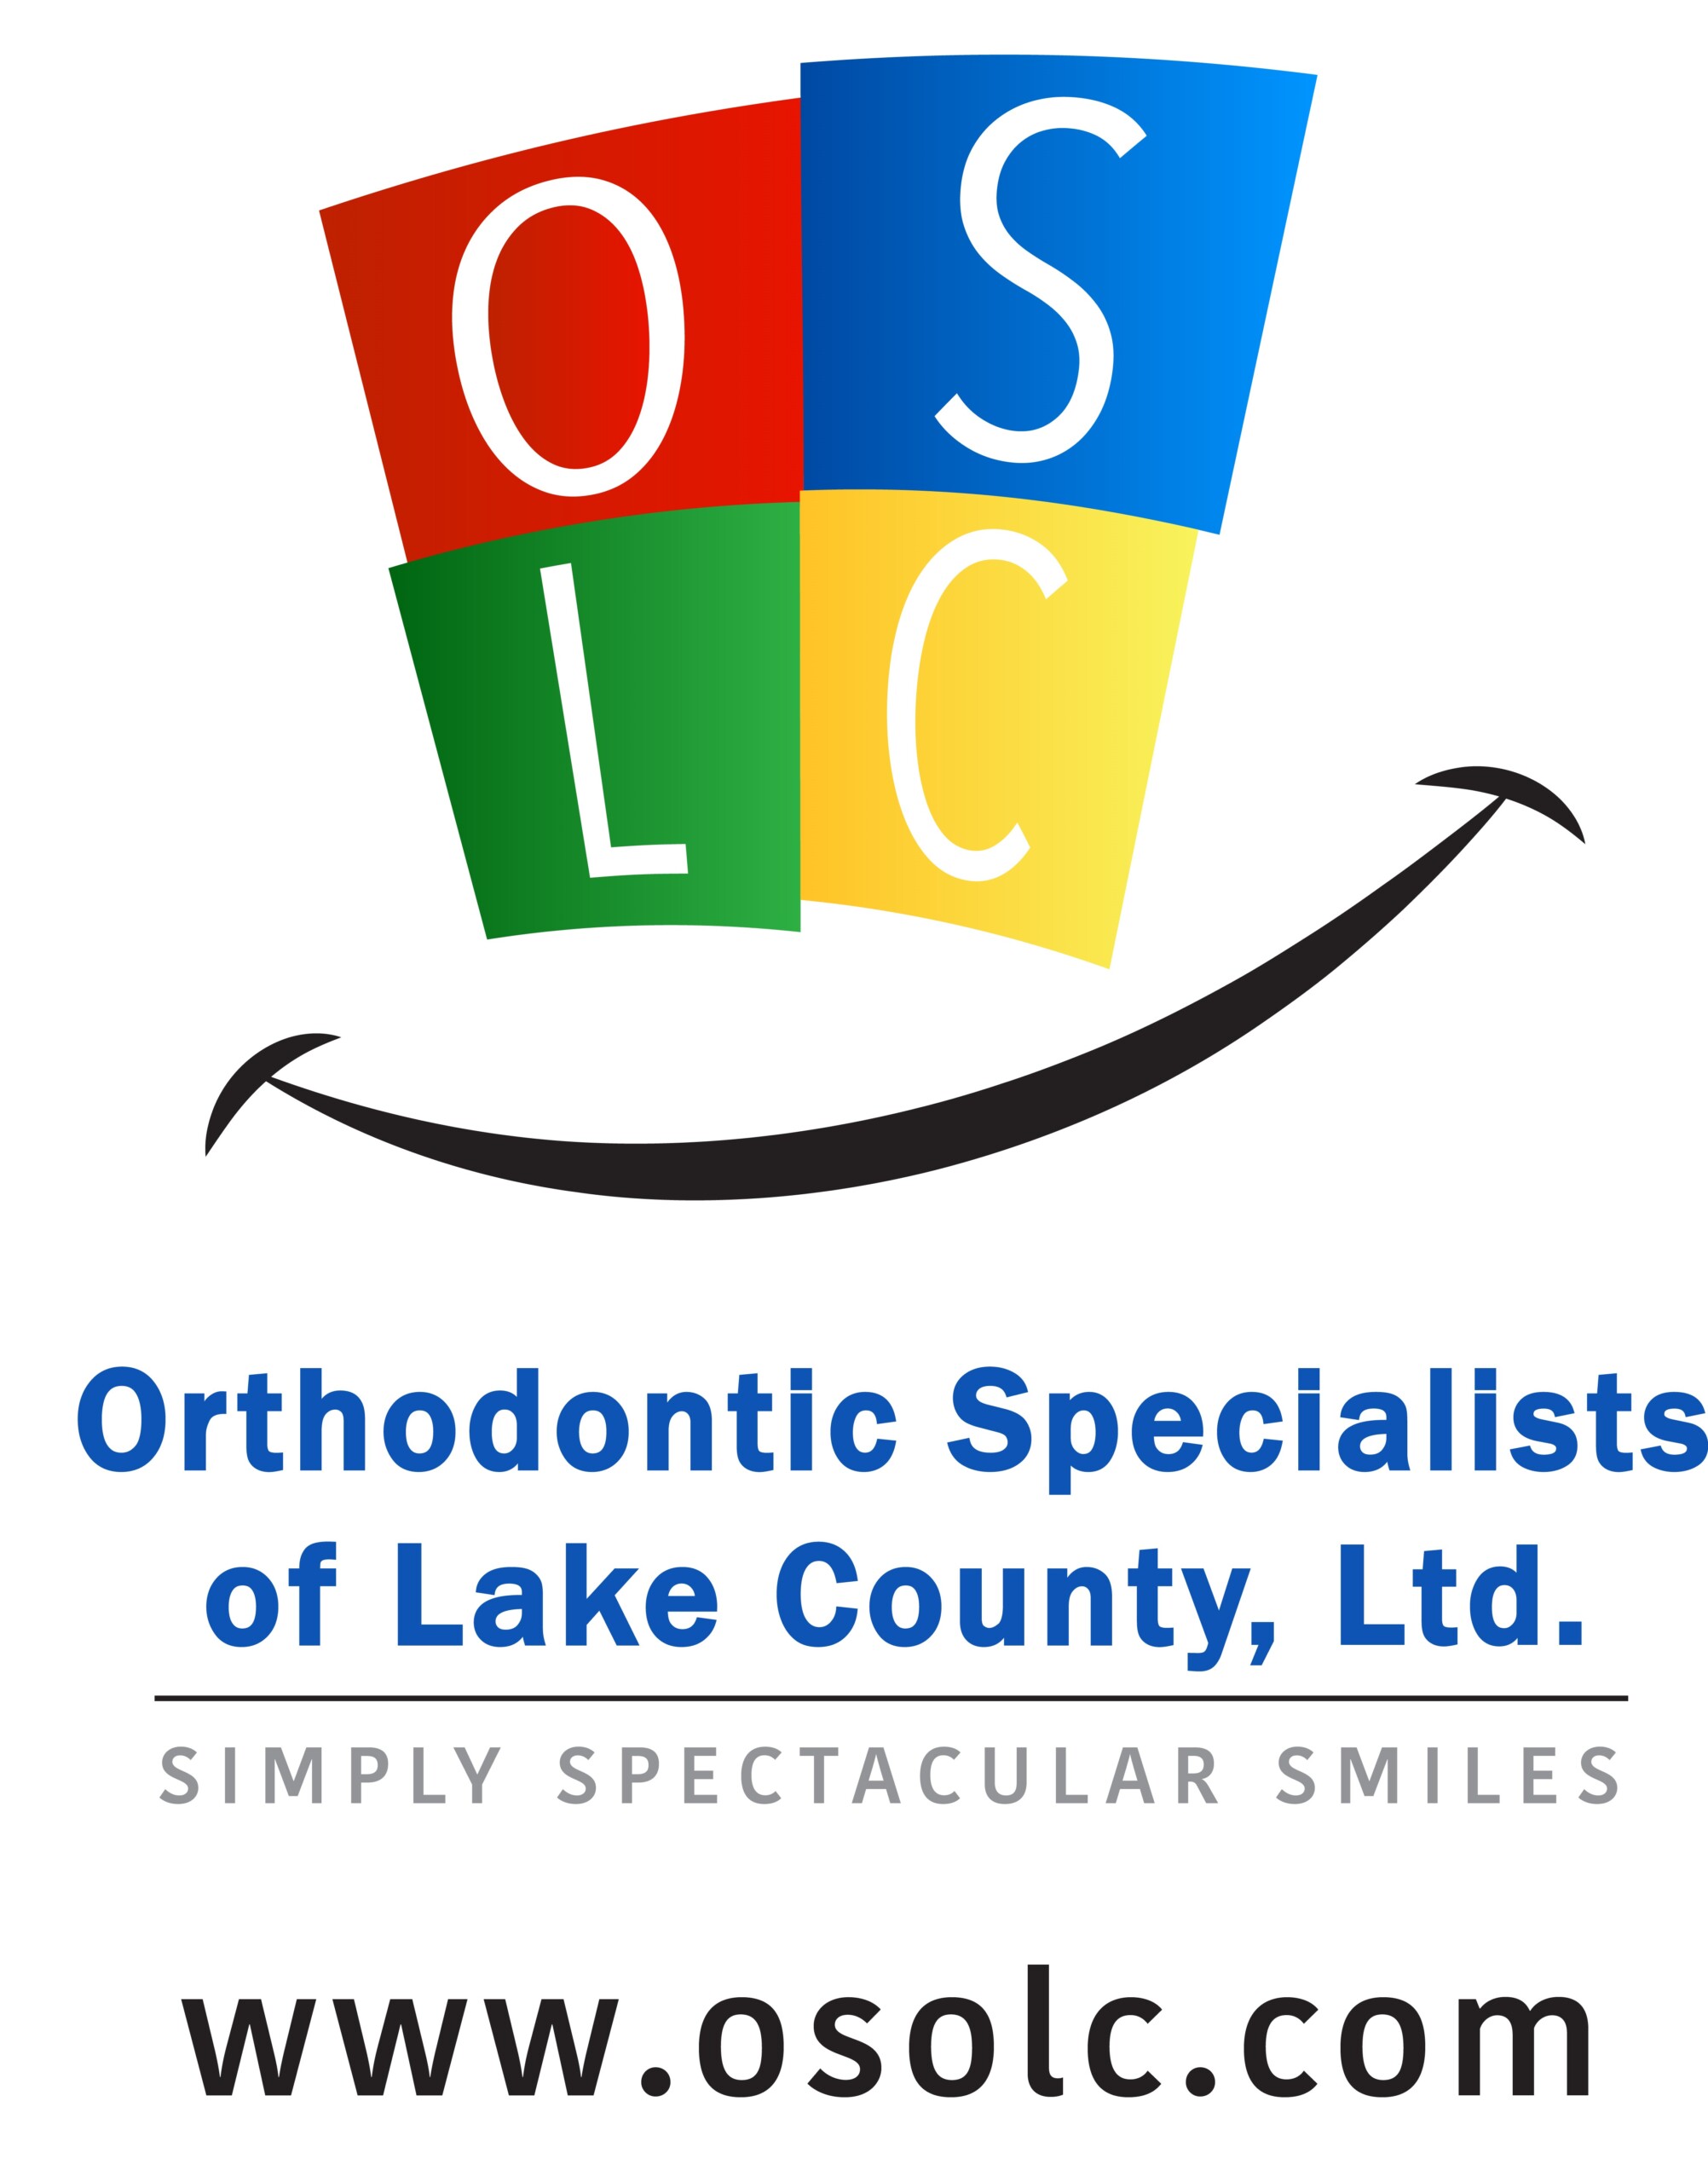 OSLC Orthodontic Specialists of Lake County Ltd. Simple Spectacular Smiles. www.osolc.com